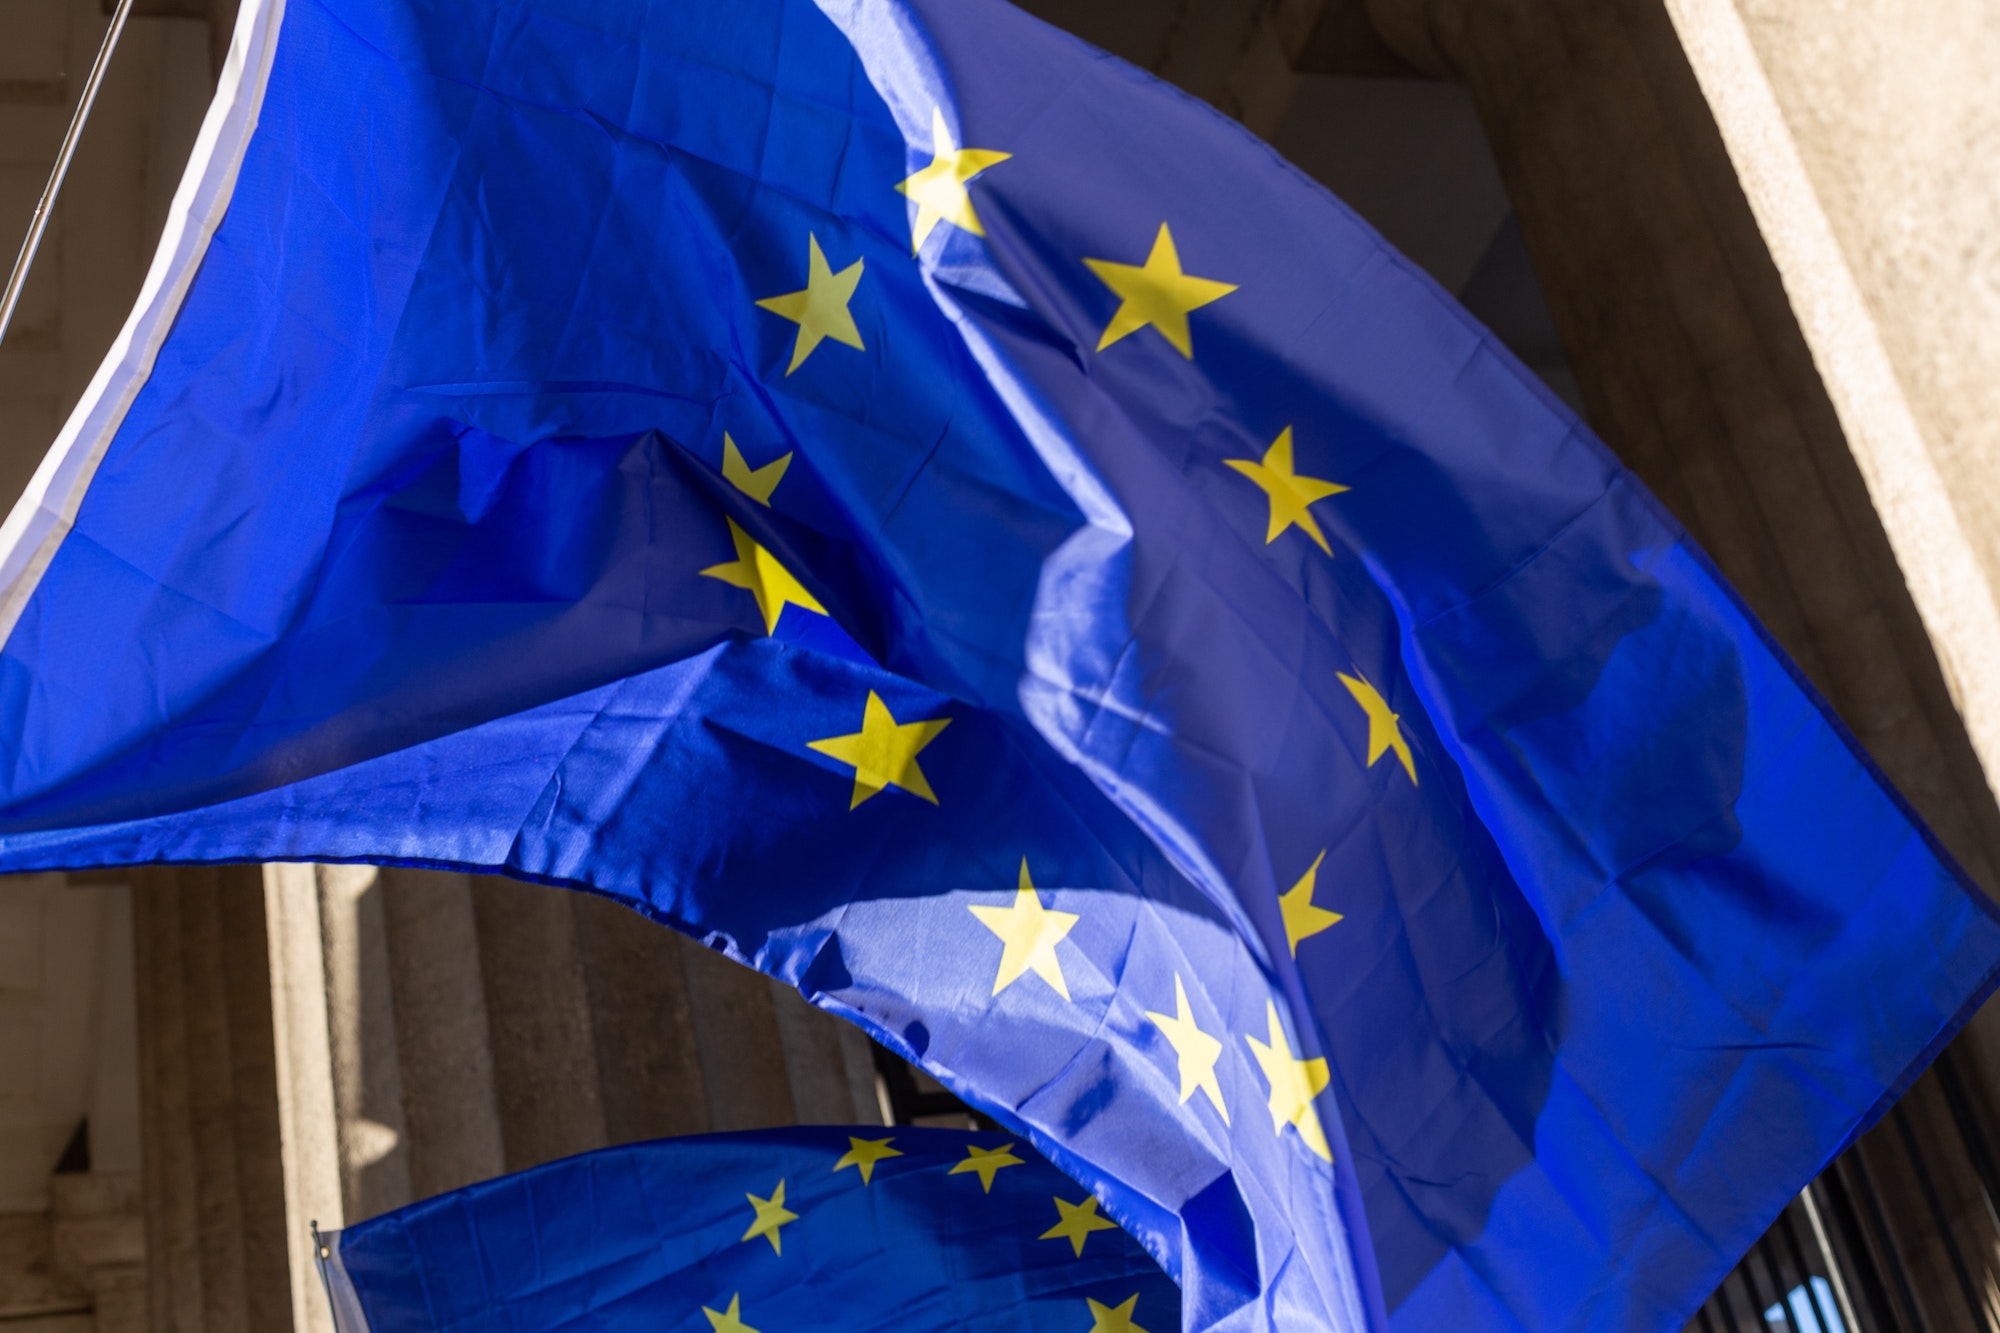 Eurosceptics More Likely to Think of the EU as Less Democratic Than It Is, Study Shows